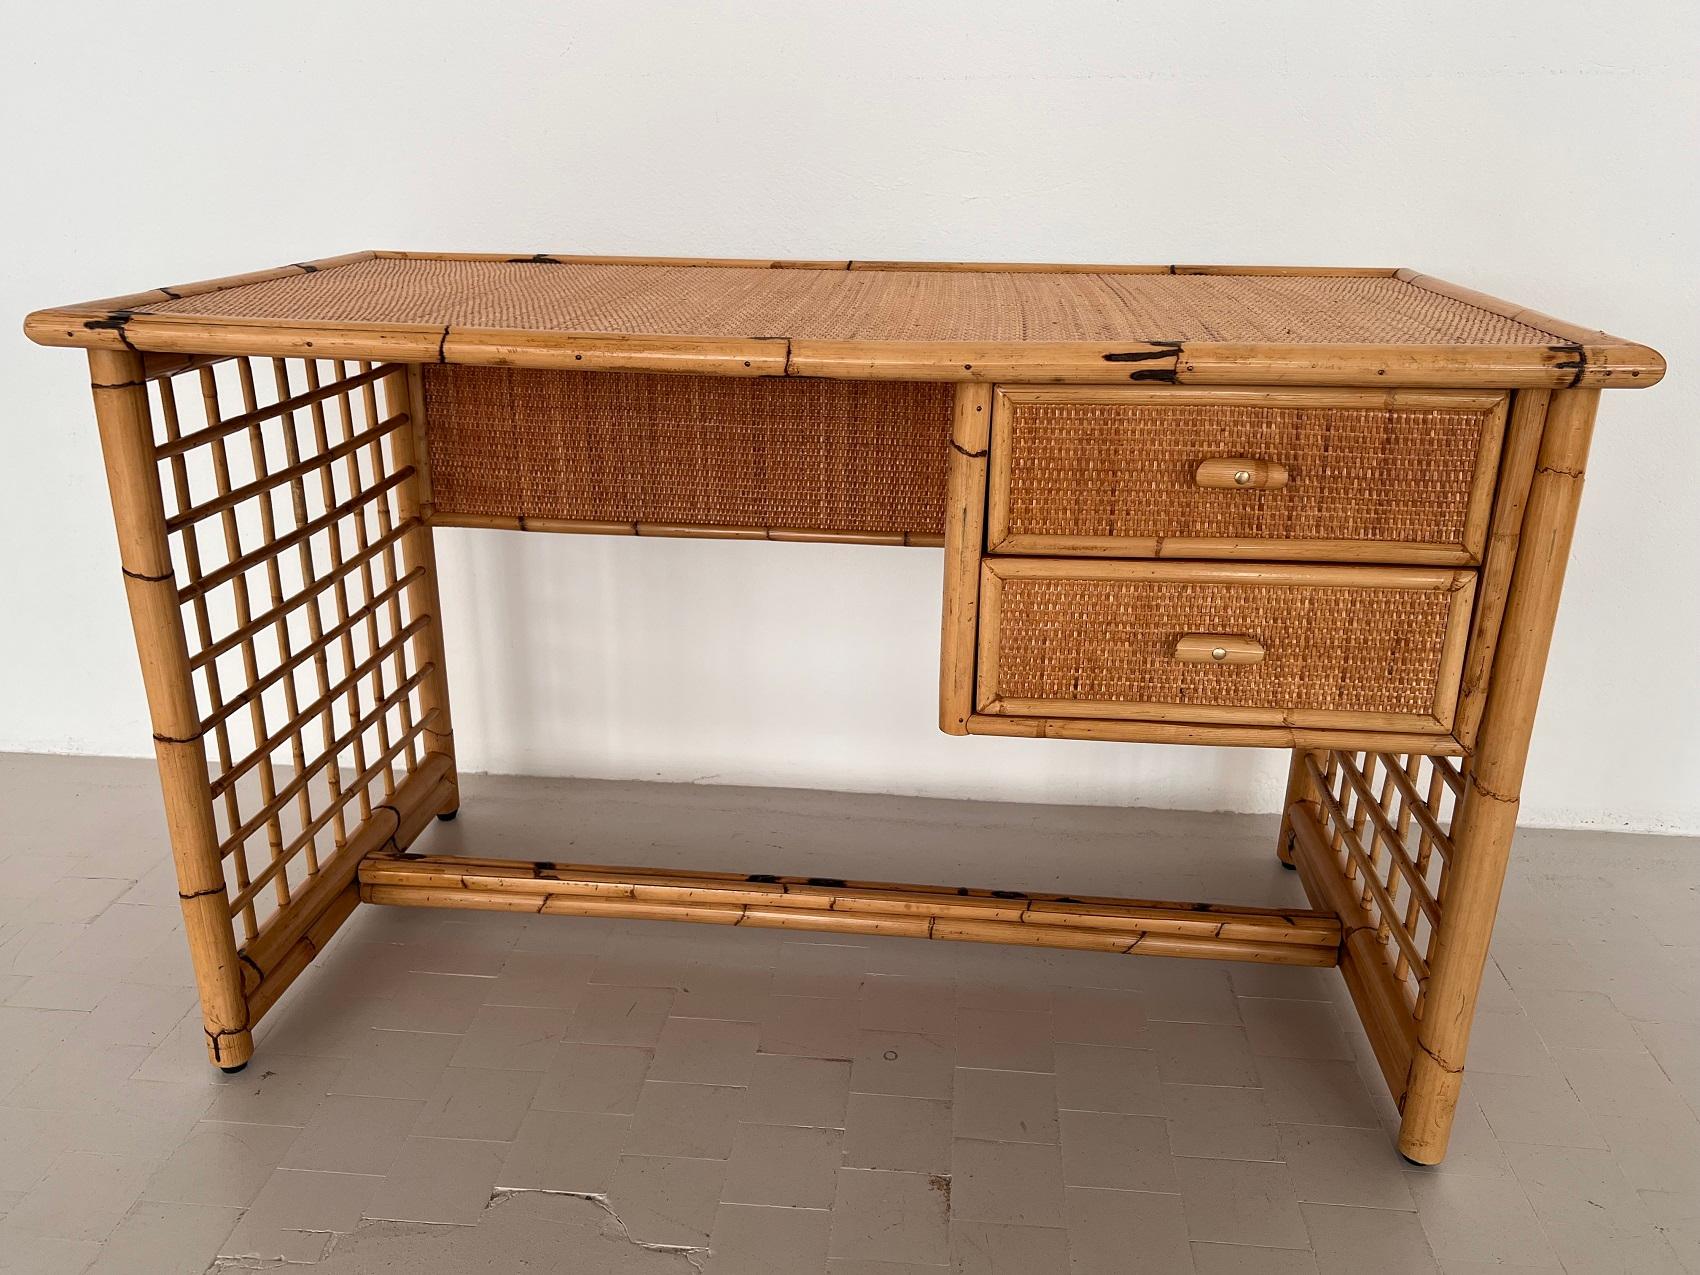 Italian Midcentury Bamboo and Rattan Desk or Vanity with two Drawers, 1970s For Sale 2